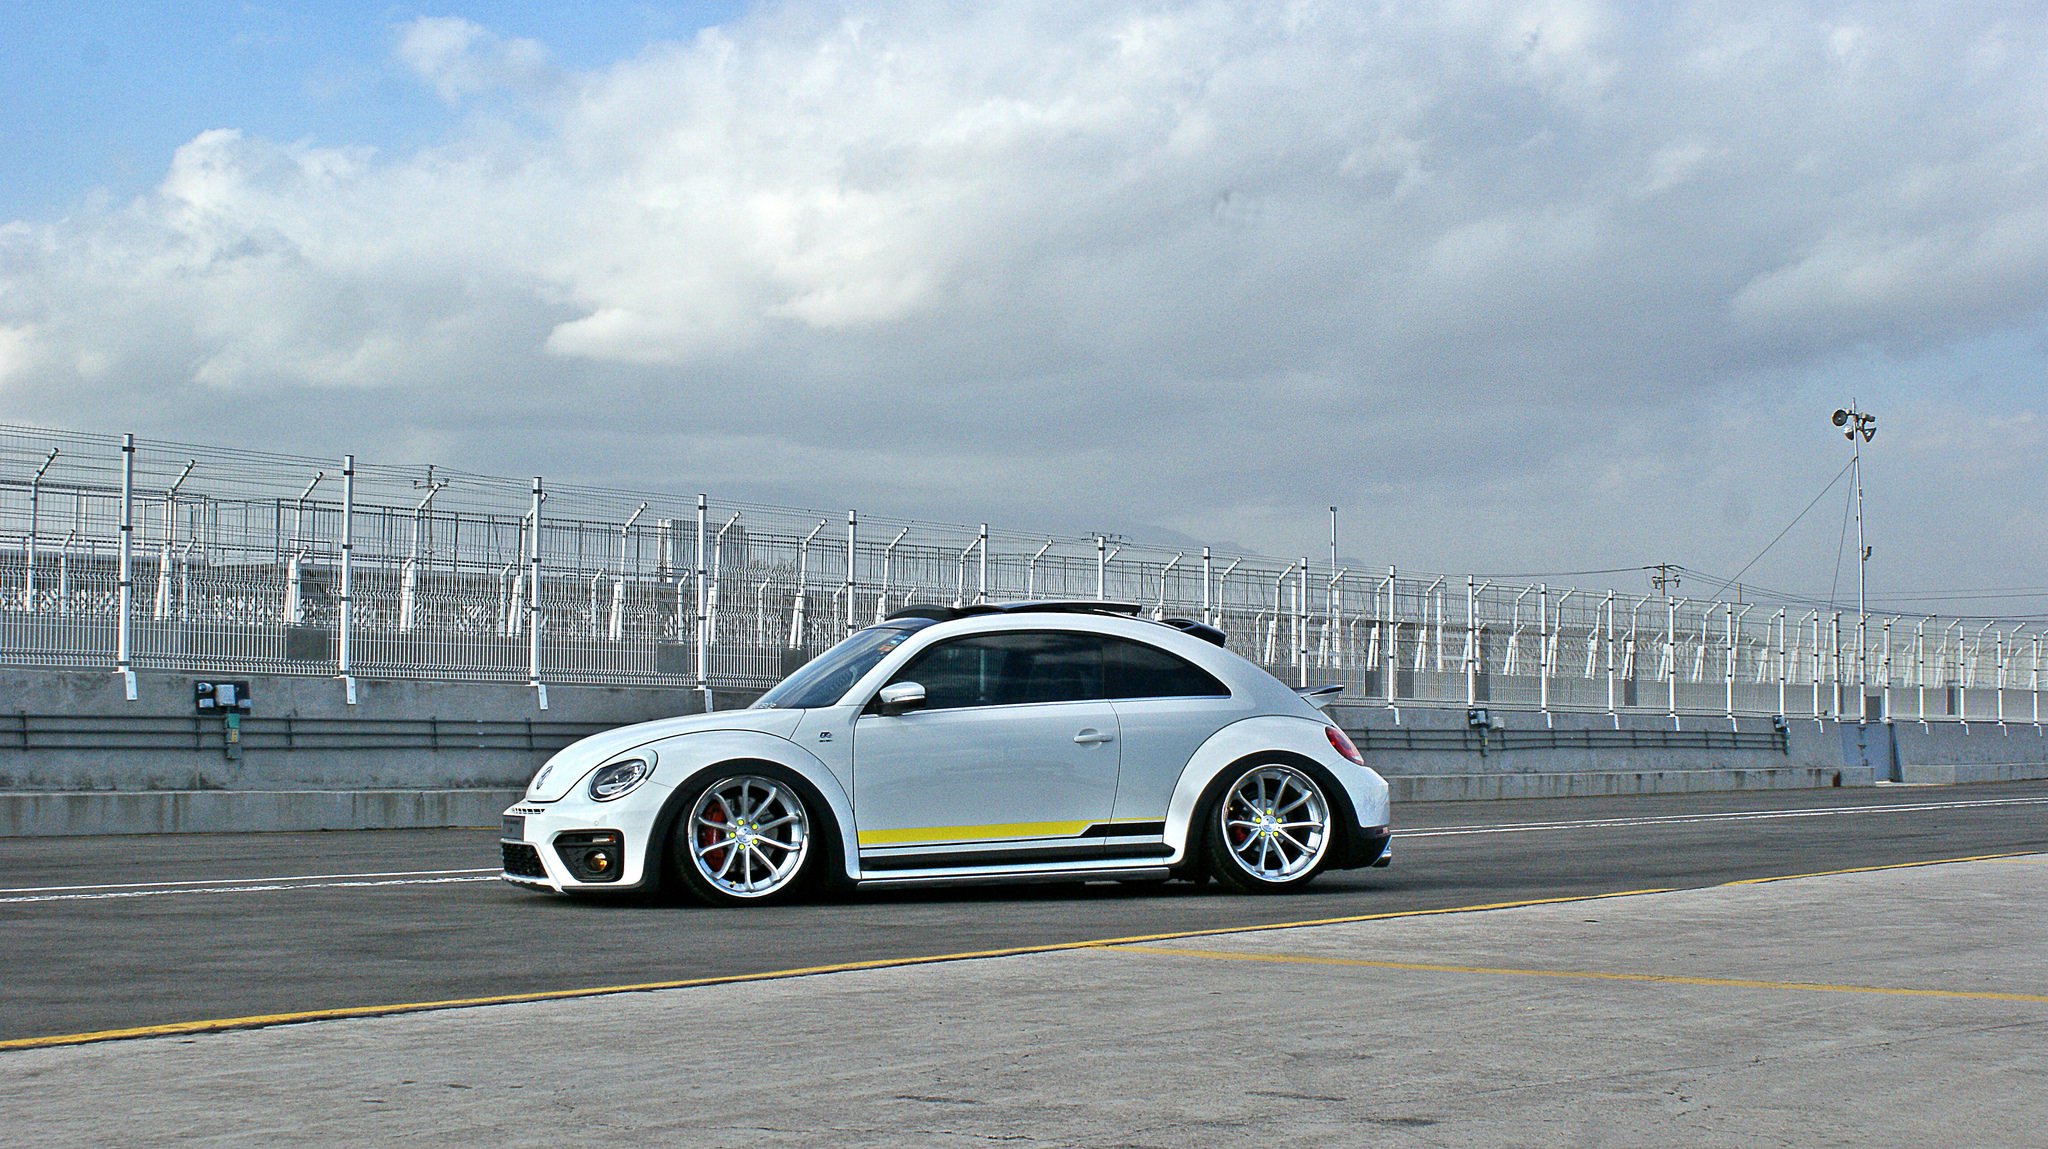 Custom Painted White VW Beetle with Blaque Diamond Wheels - Photo by Blaque Diamond Wheels